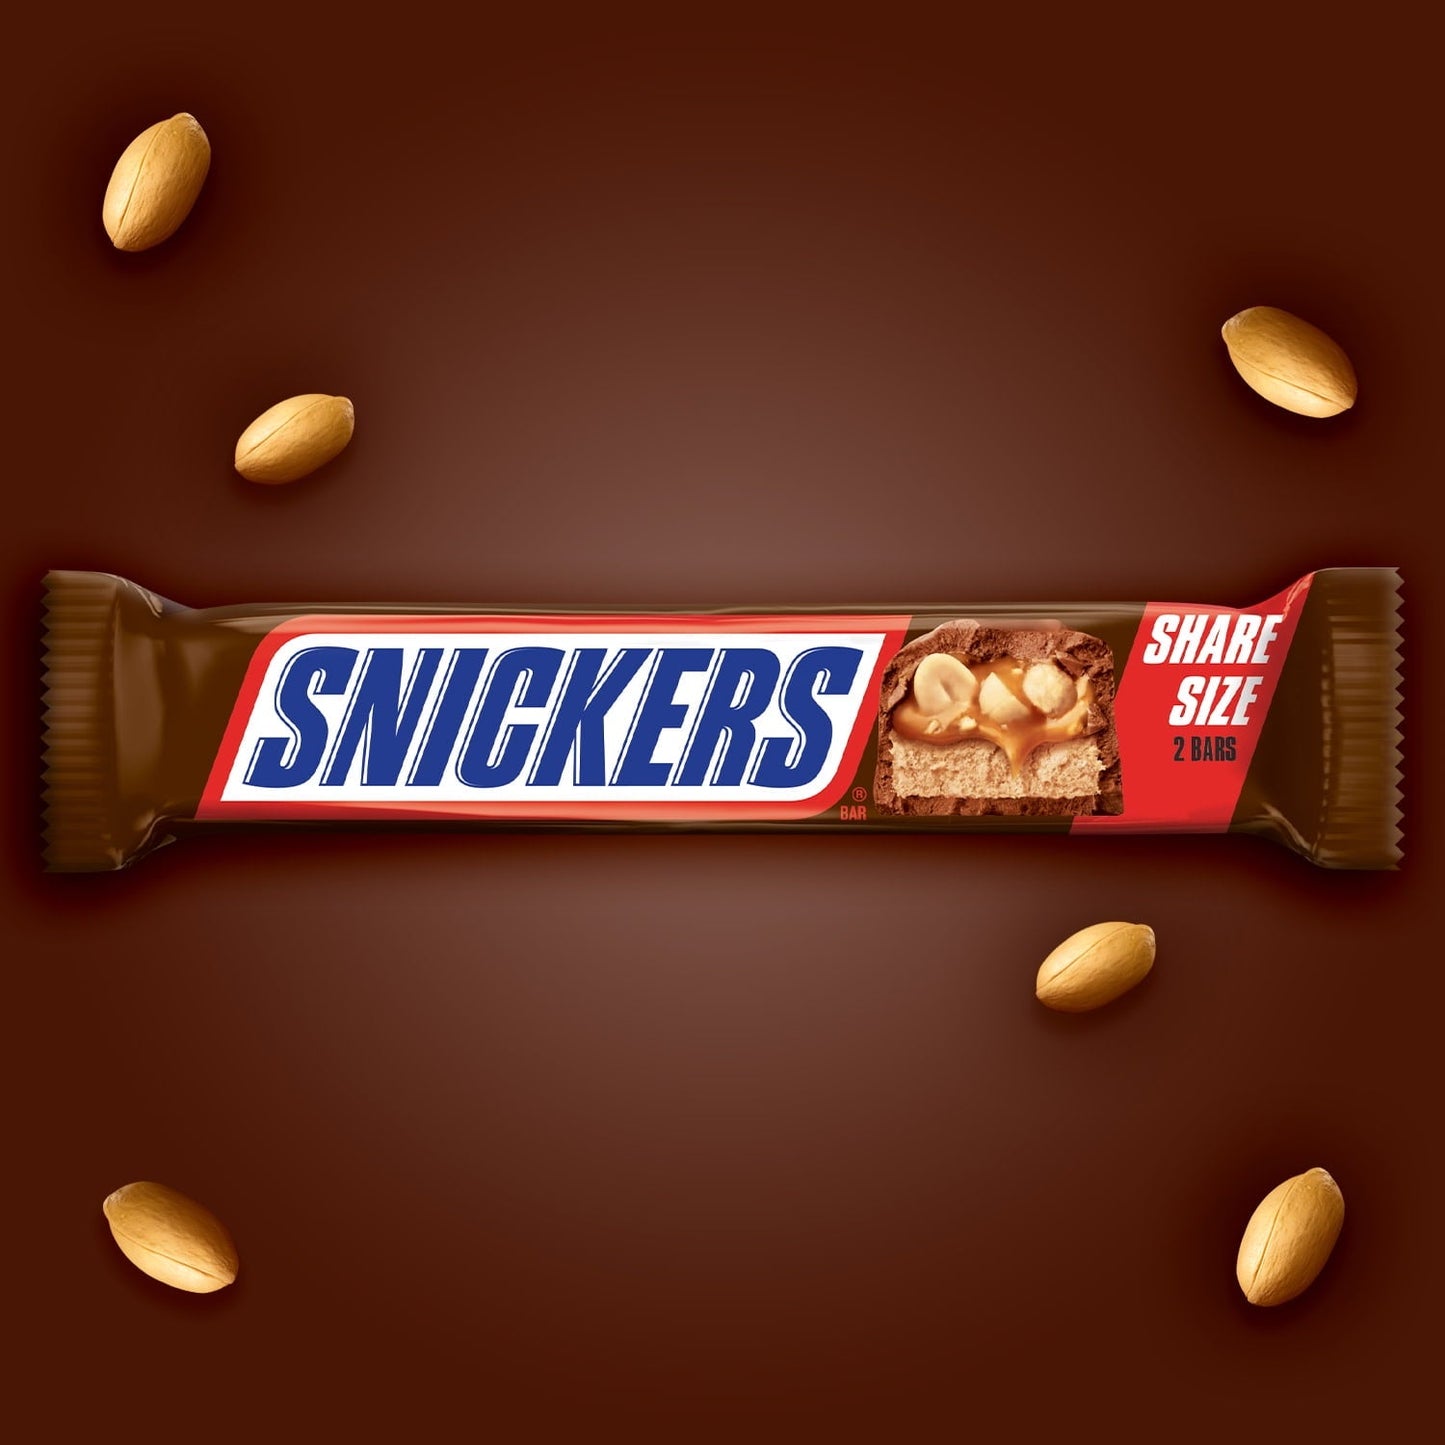 Snickers Milk Chocolate Candy Bars, Share Size - 3.29 oz